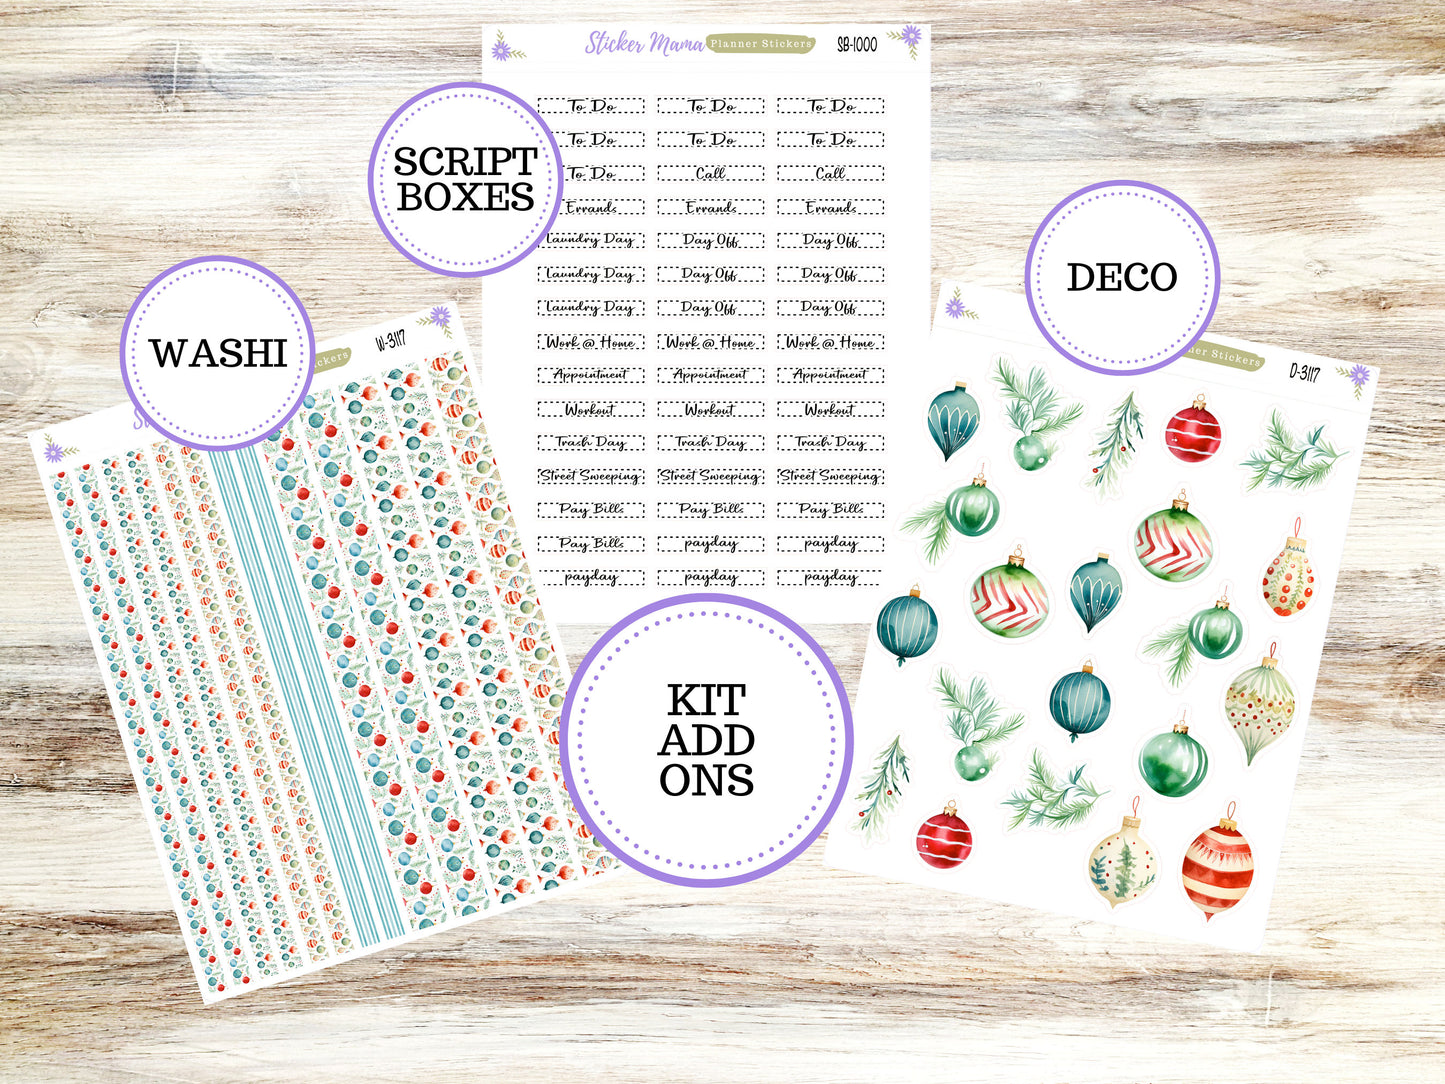 A5 COMPACT VERTICAL-Kit #3117 ||  Merry Ornaments - Compact Vertical - Planner Stickers - Erin Condren Compact Vertical Weekly Kit